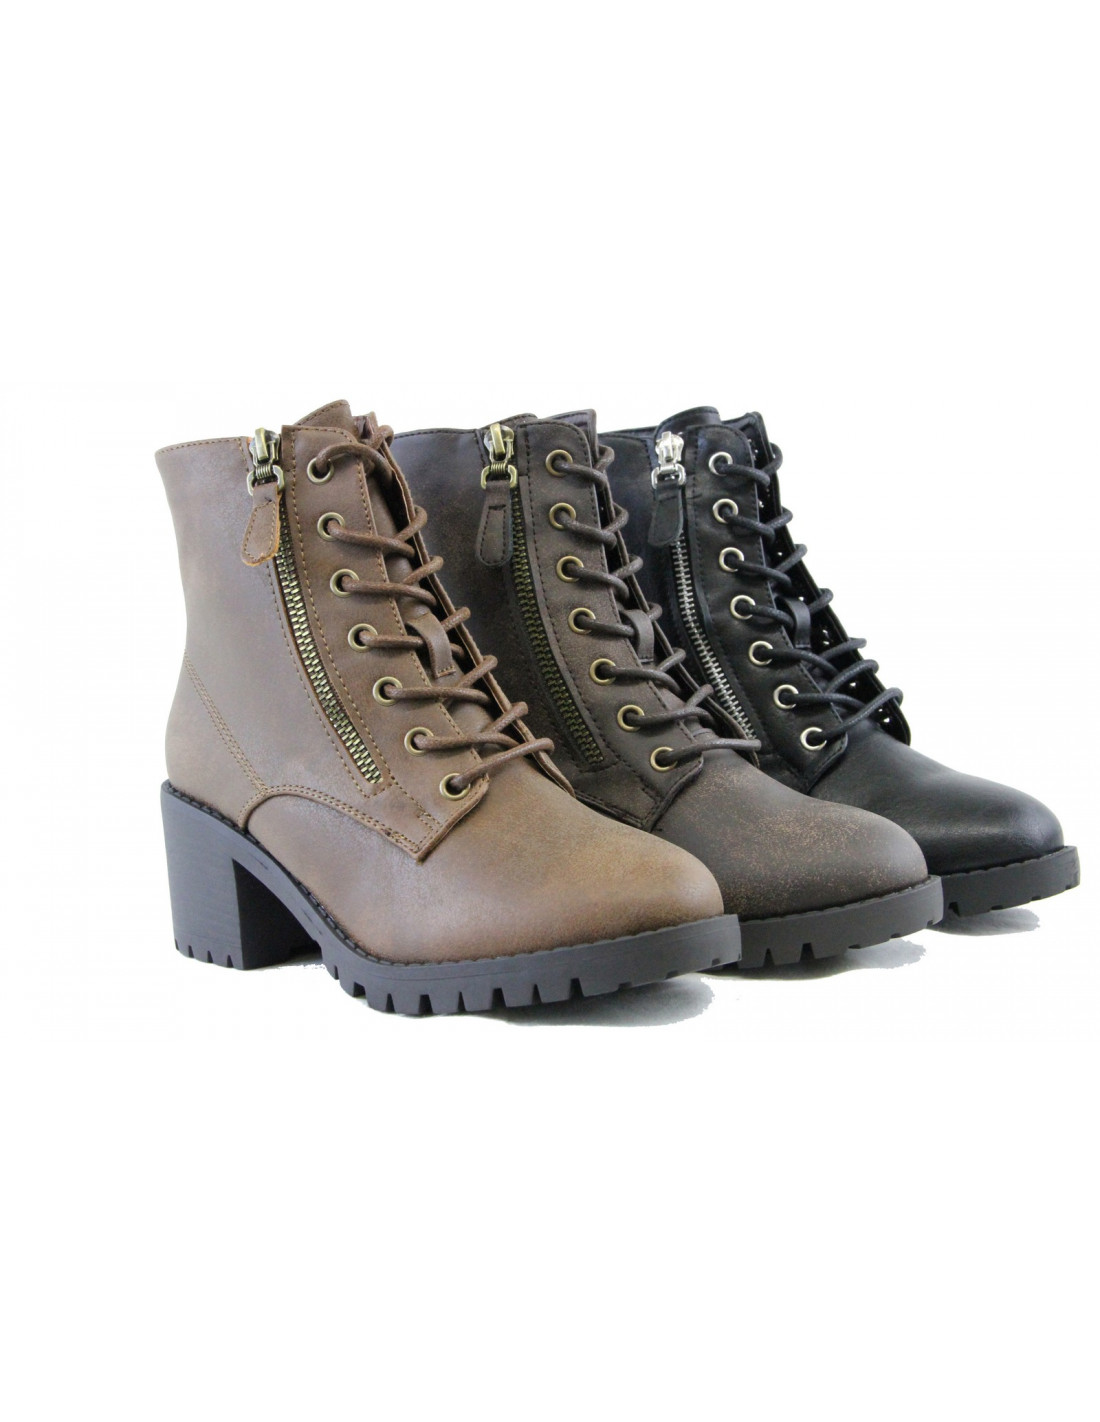 Details about   Womens 2020 Fashion Buckle Strap Lace Up Block Heel Combat Ankle Boots Shoes BYW 